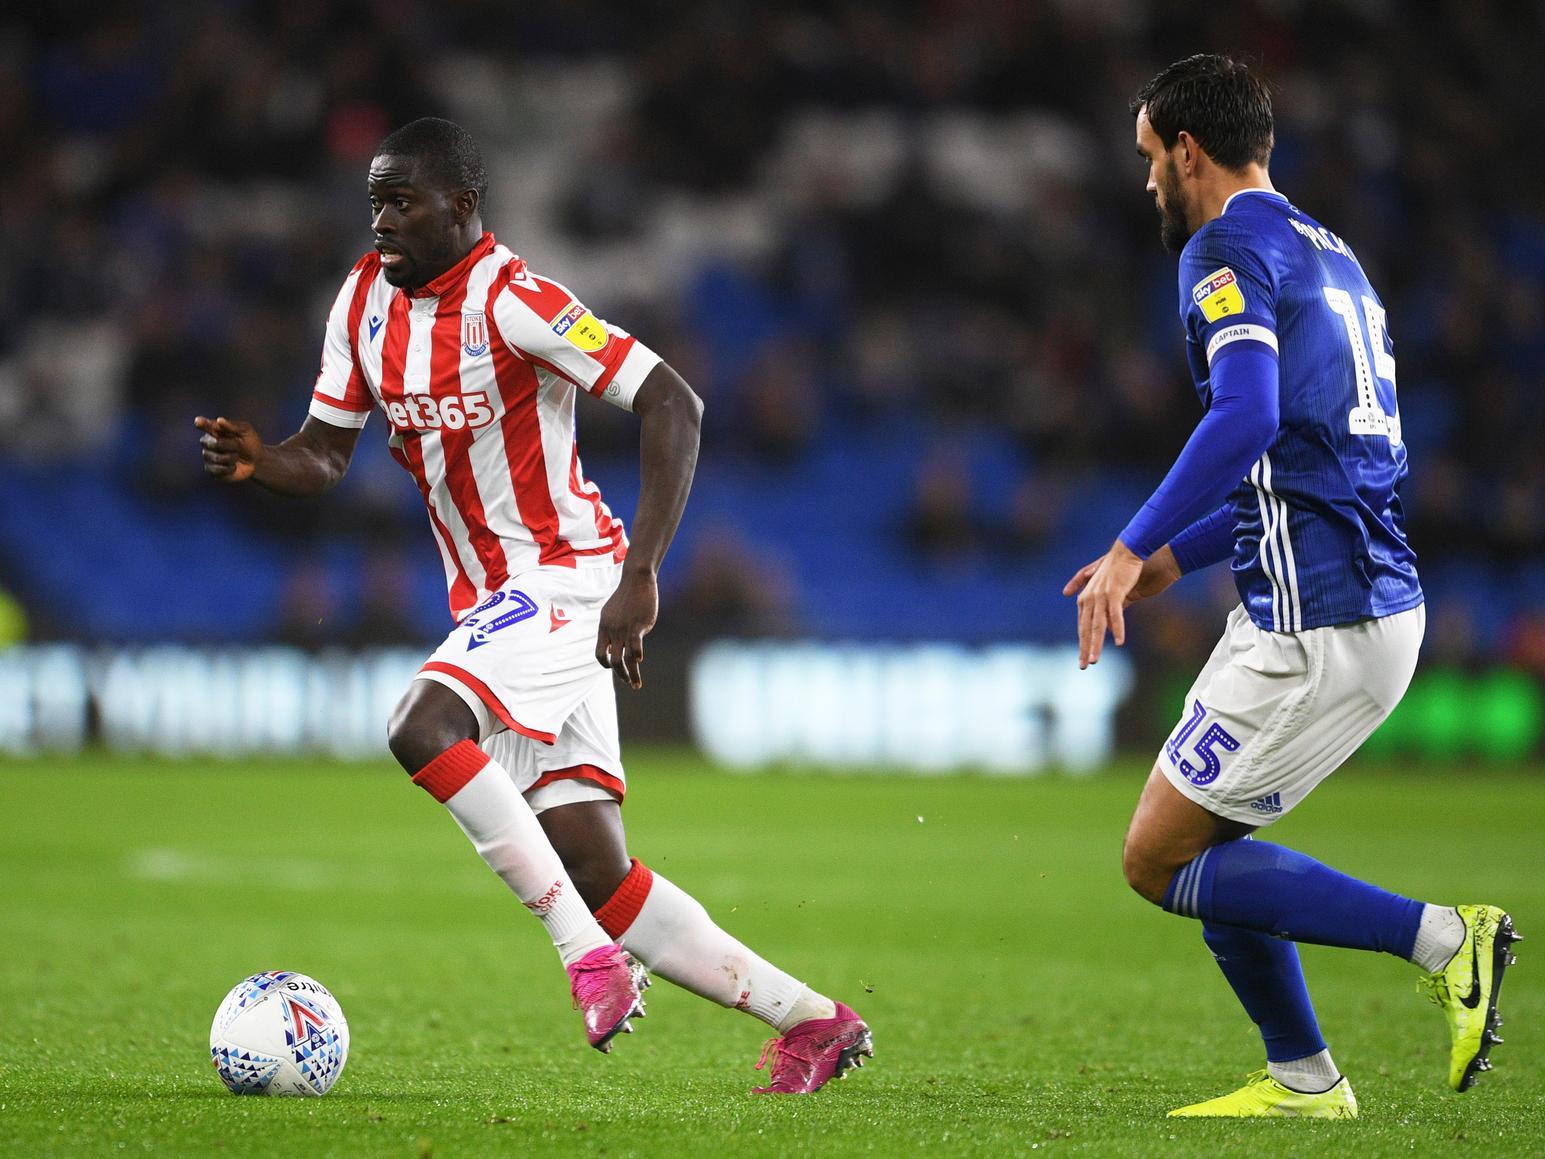 Galatasaray look ready to battle their divisional rivals Trabzonspor for Stoke City for midfield Badou Ndiaye, who looks increasingly to make a return to Turkish football in January. (Sport Witness)